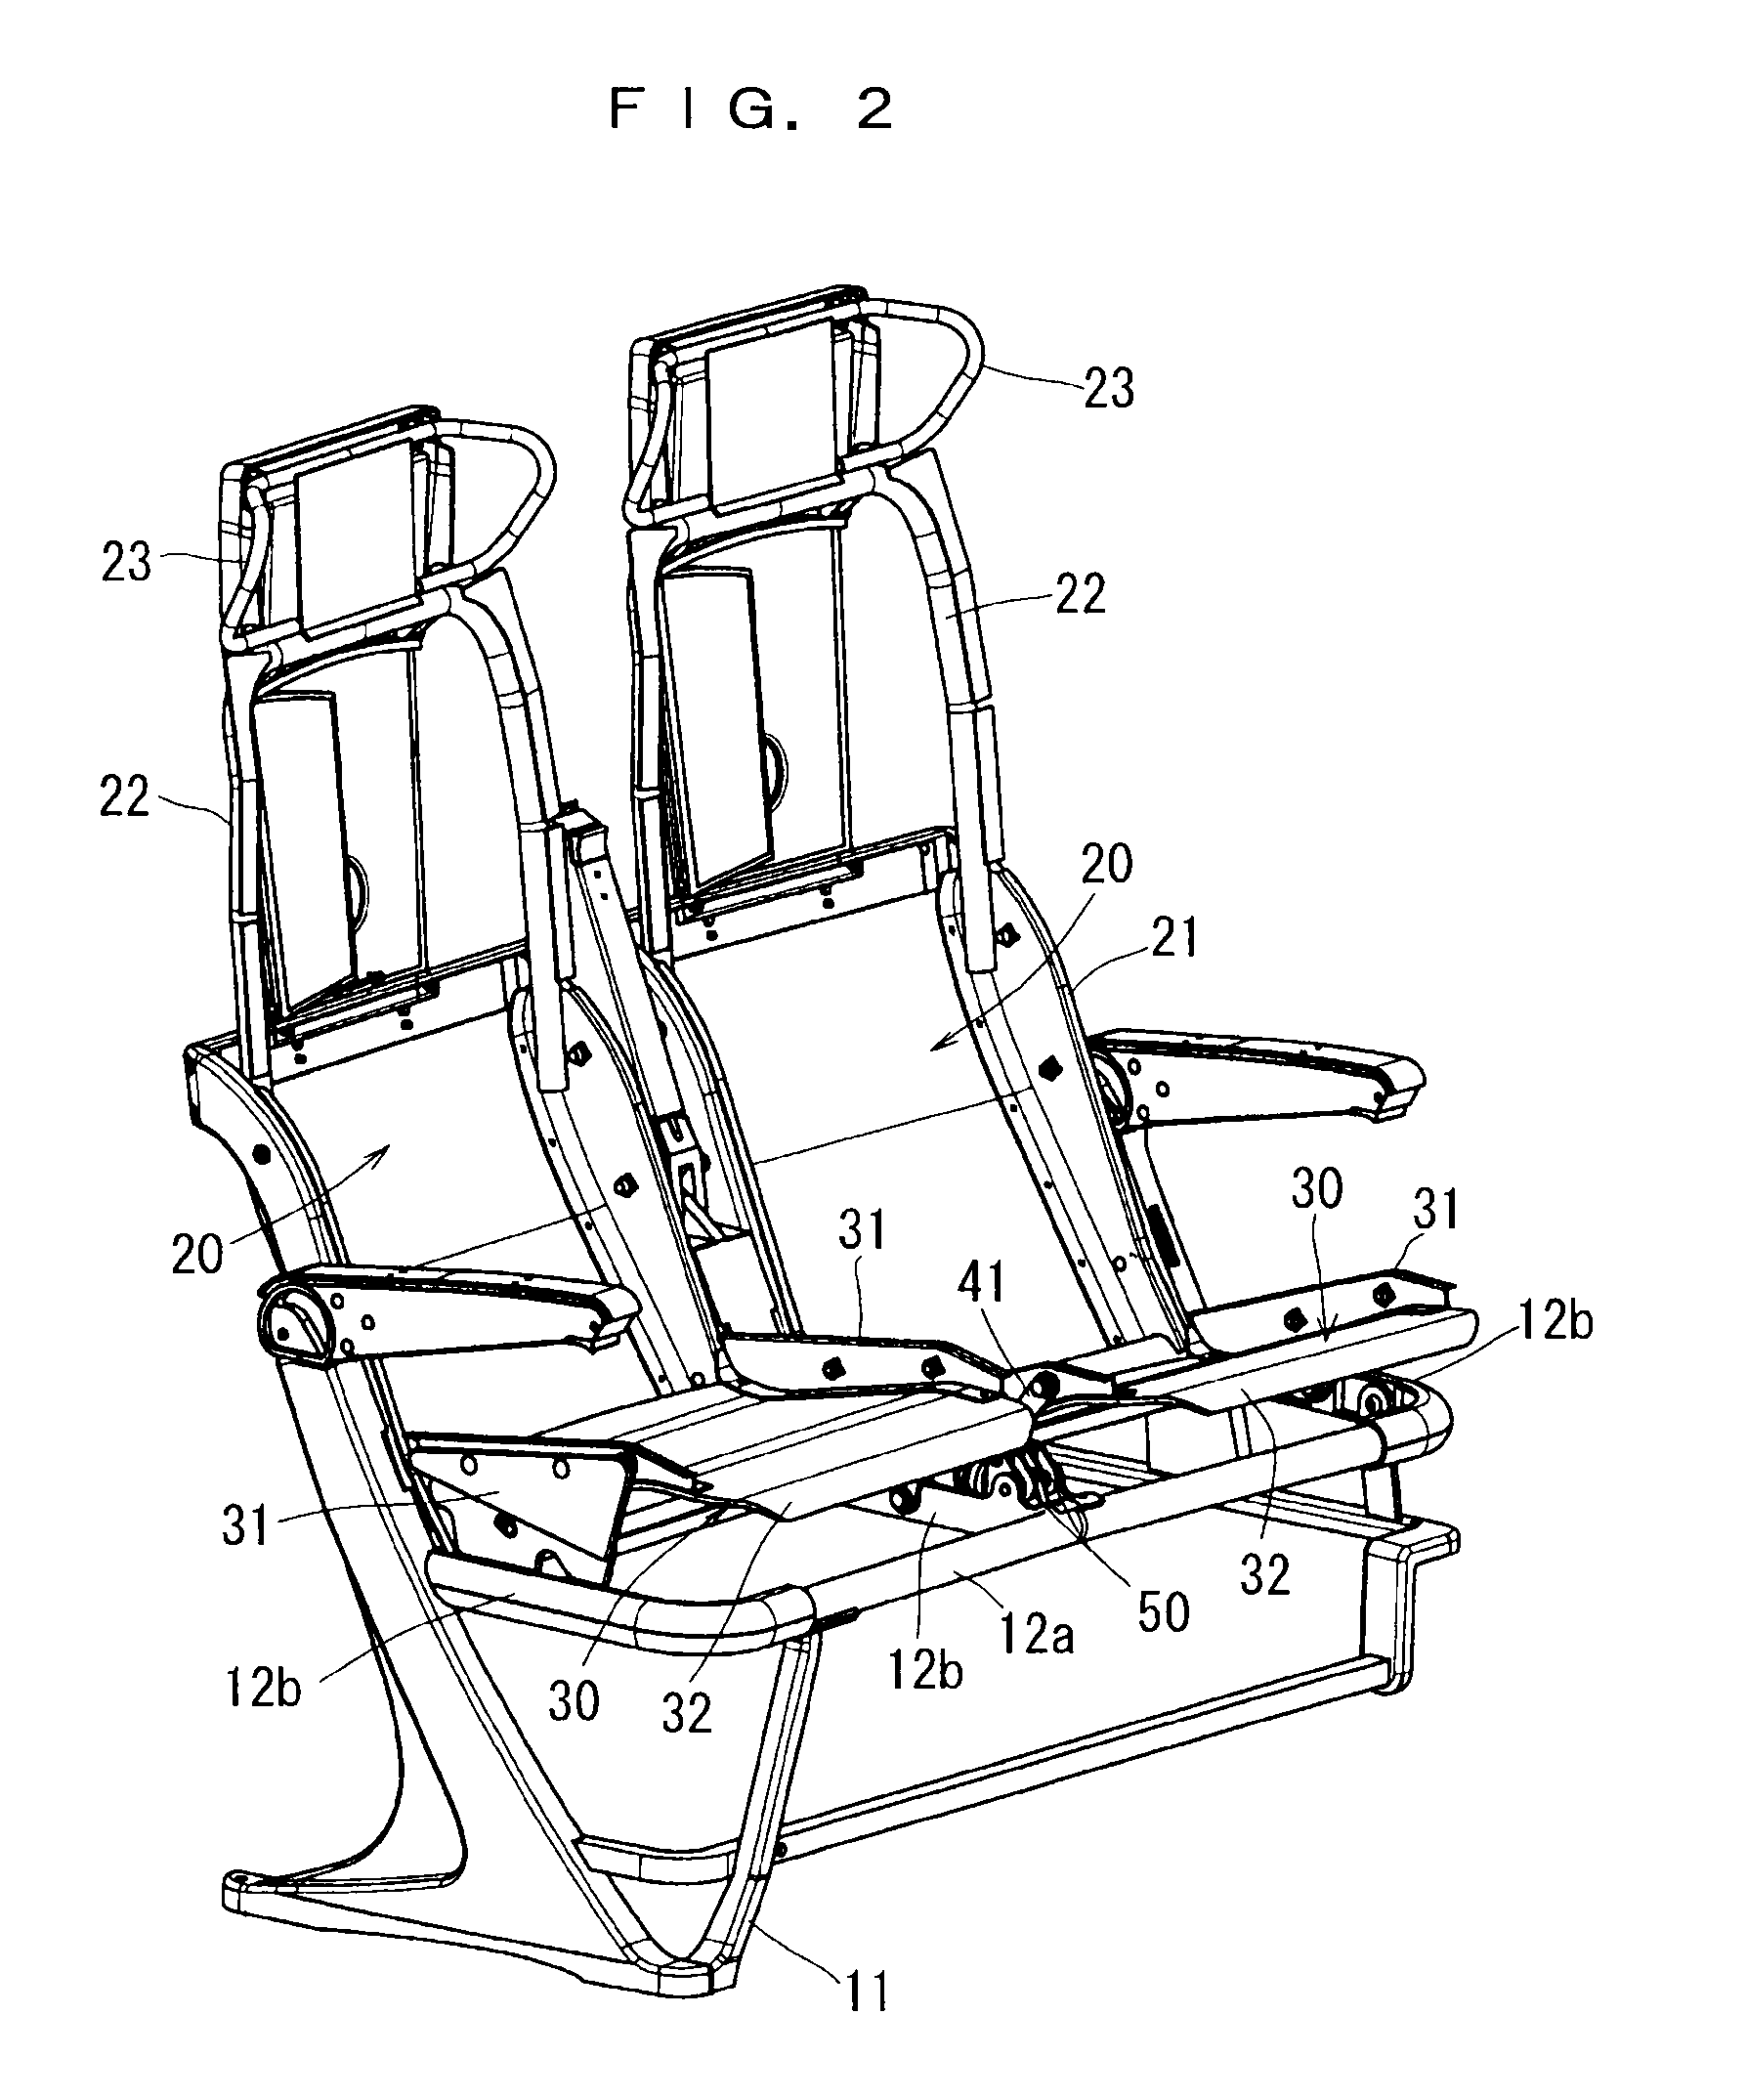 Seat structure